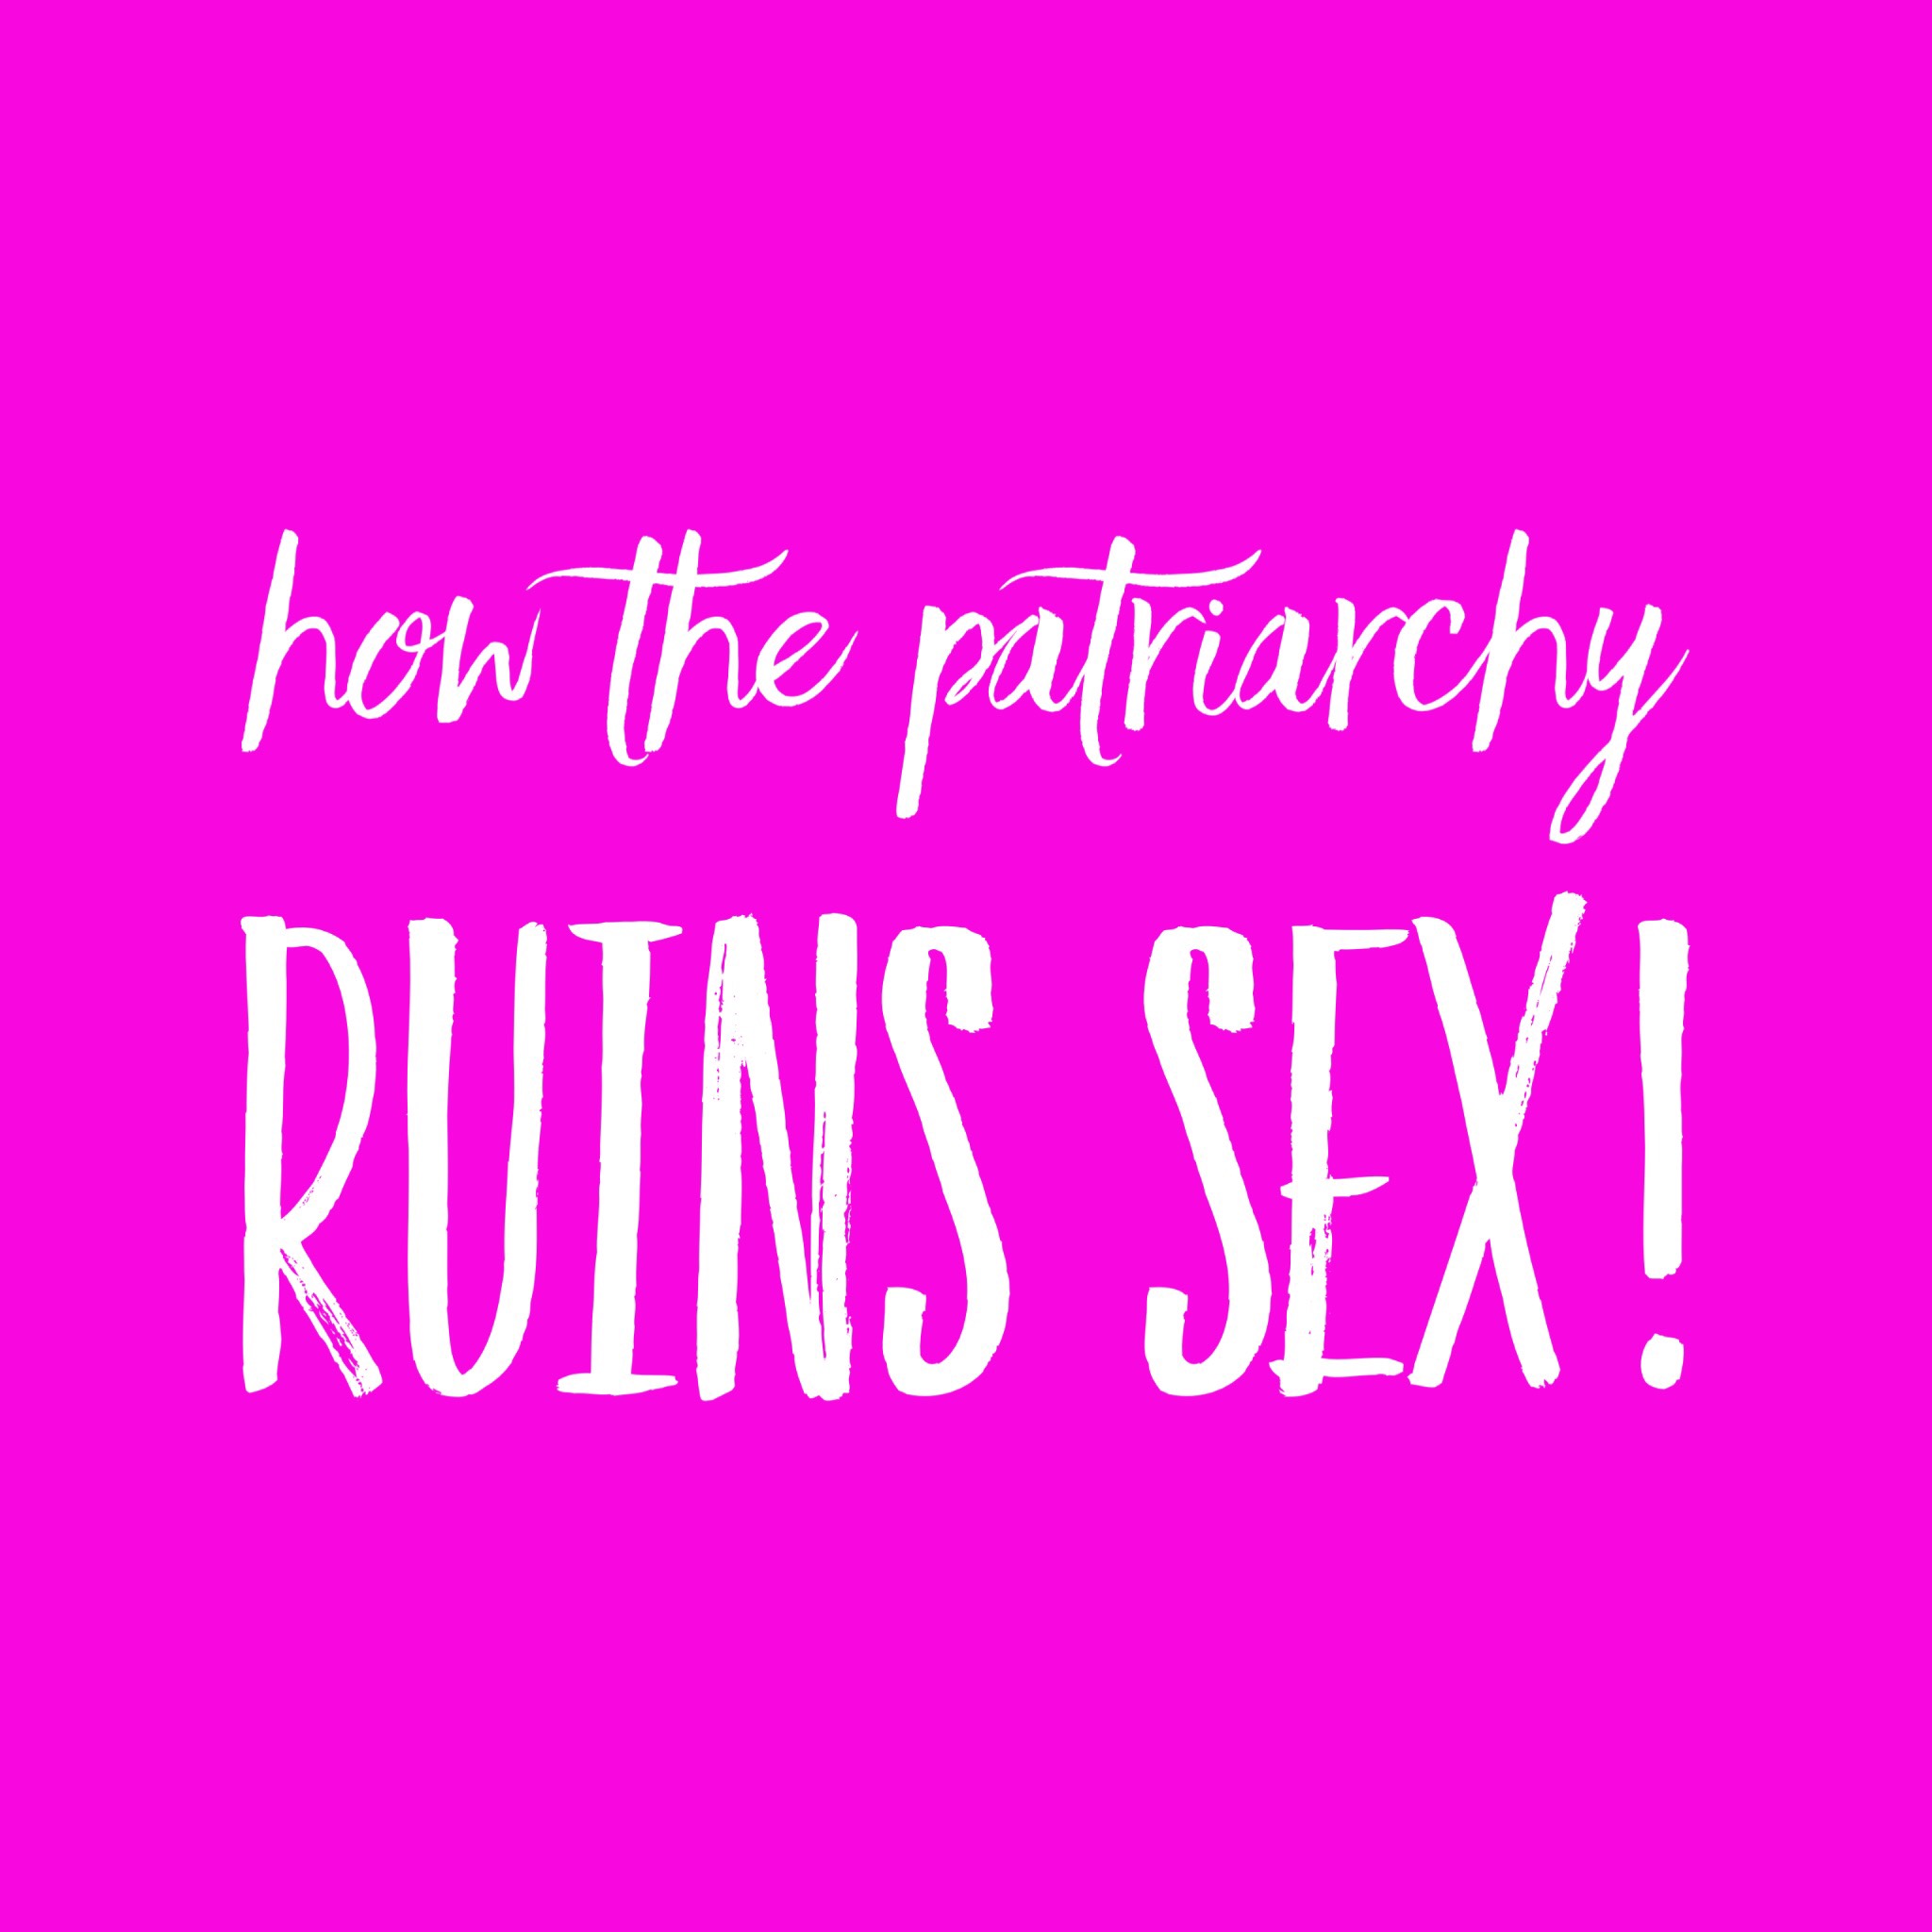 How the patriarchy ruins sex...